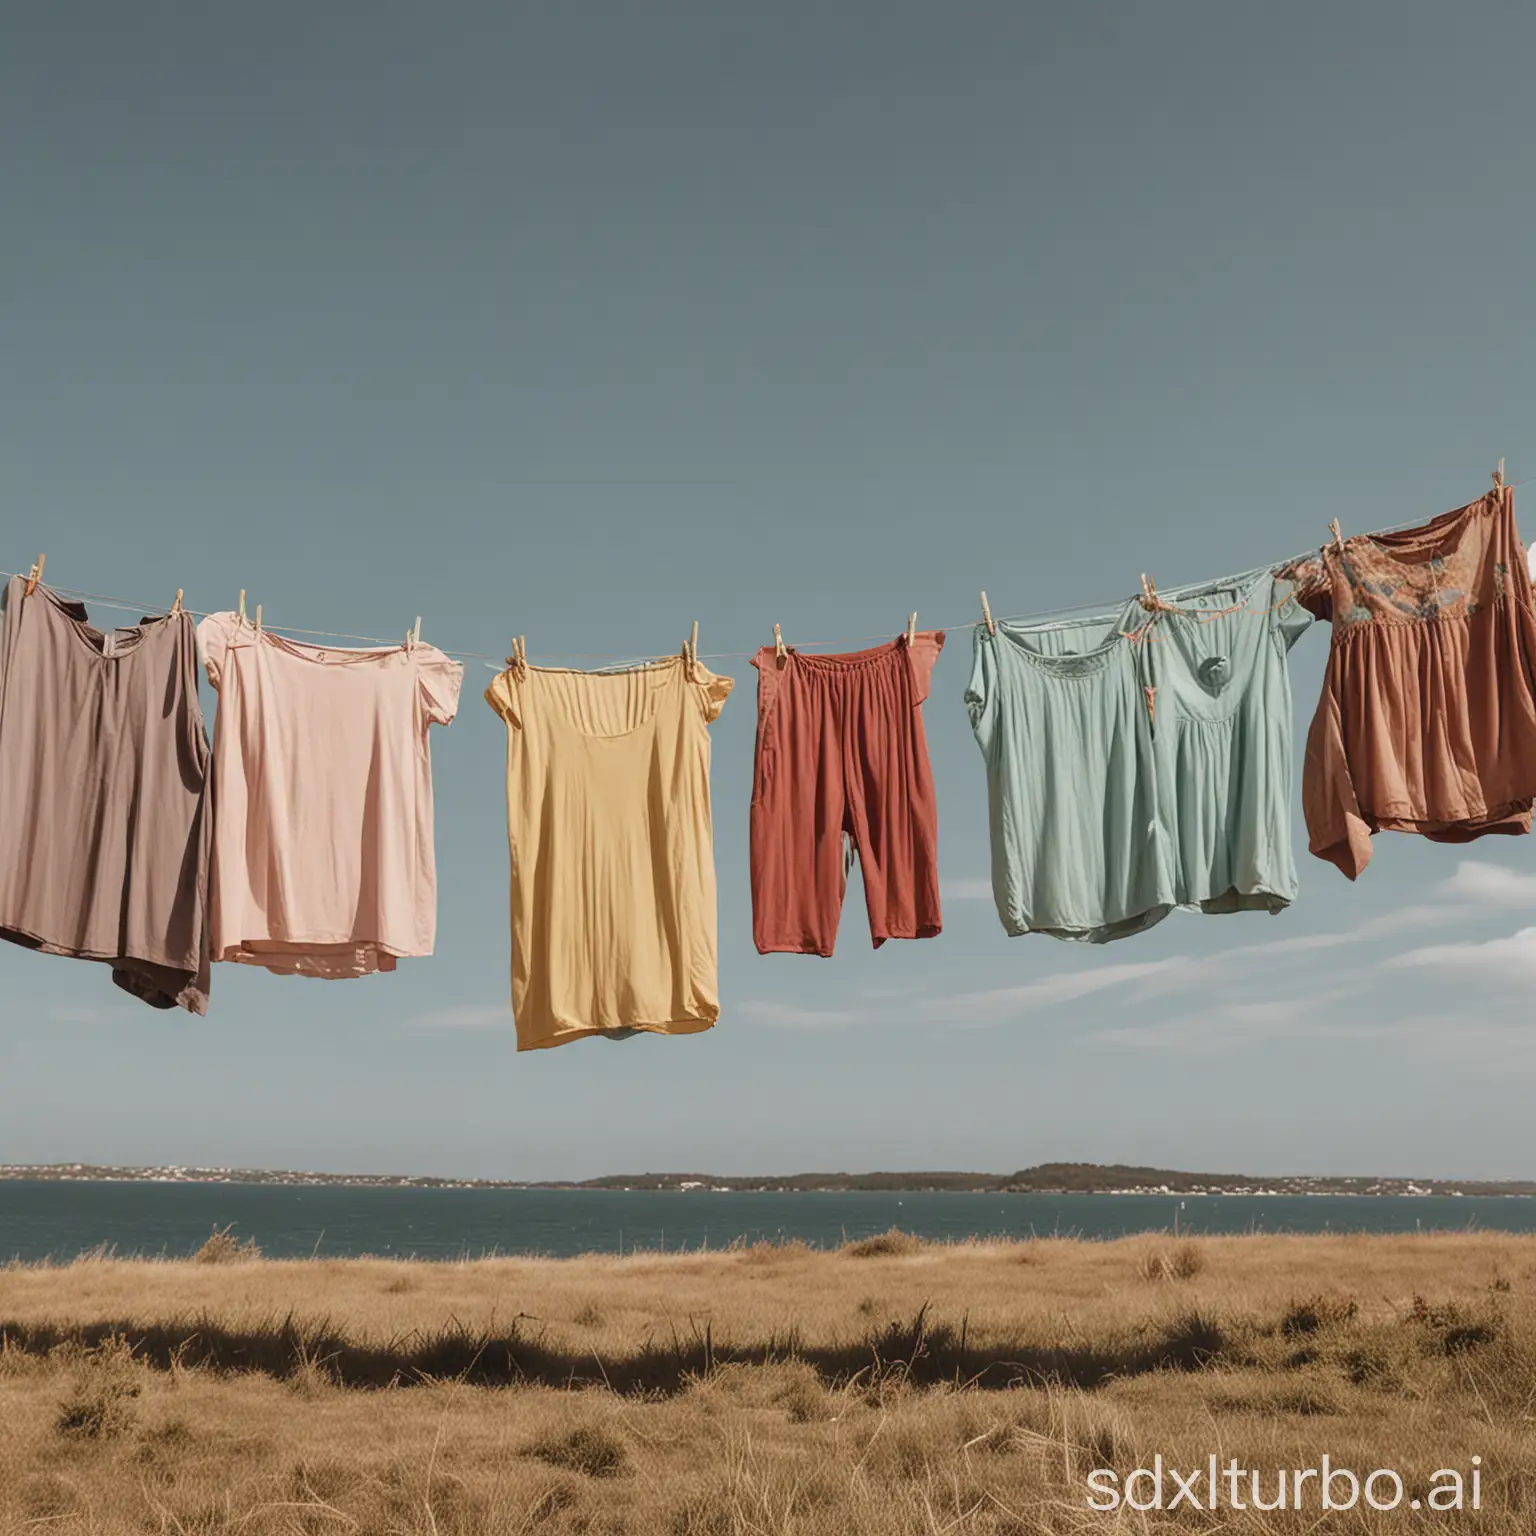 A variety of clothes in different designs, colors, and fabrics are hanging on a clothesline. The clothes are blowing in the wind, creating a sense of movement and energy.